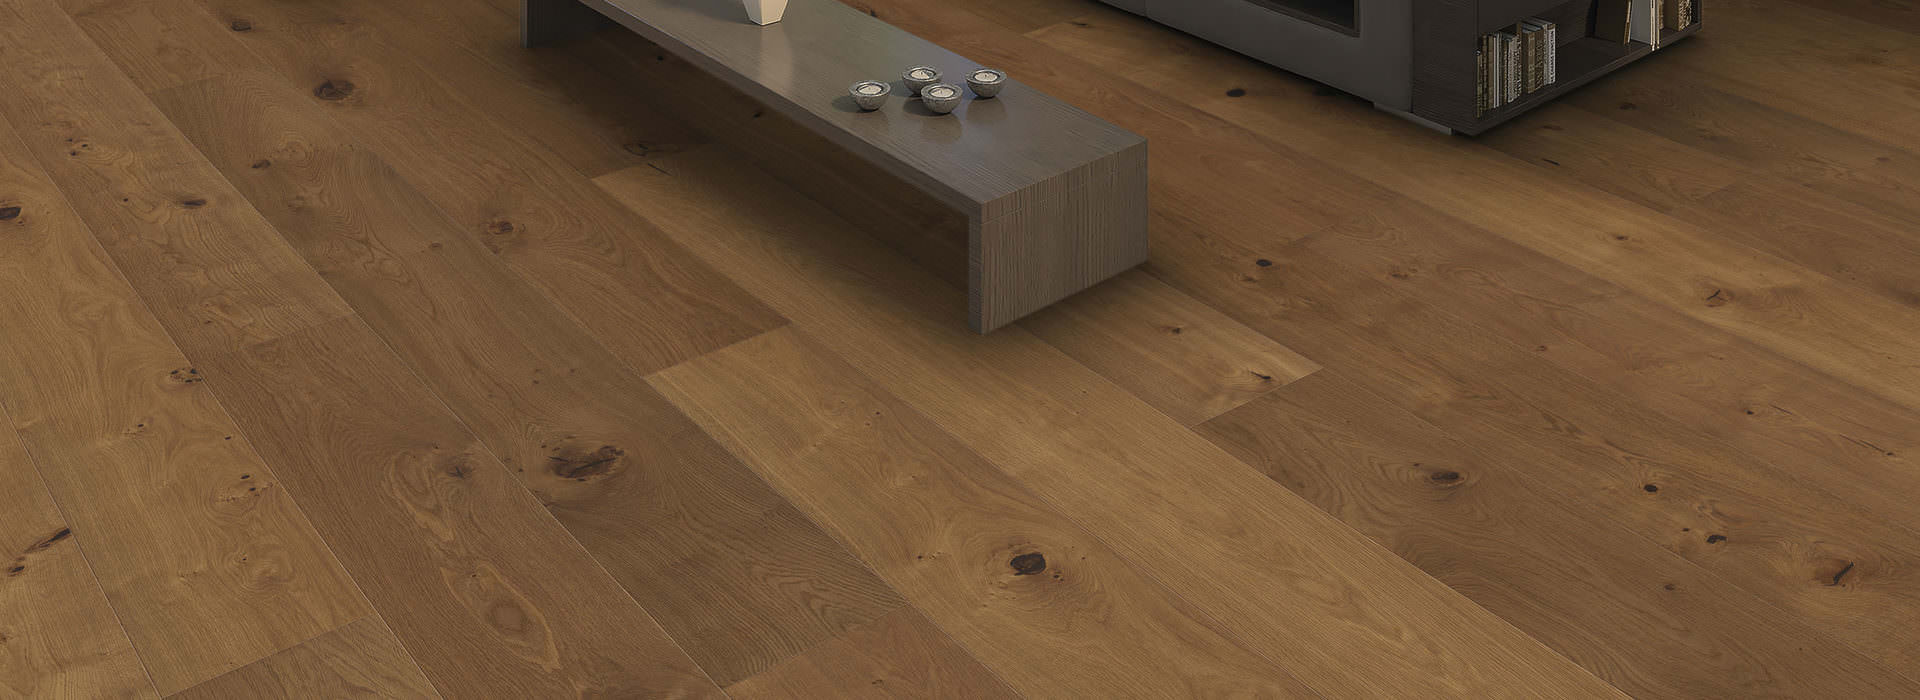 HARO PARQUET 4000 Plank 1-Strip Plaza 240 4V Fumed Oak Invisible Universal brushed naturaLin plus Top Connect